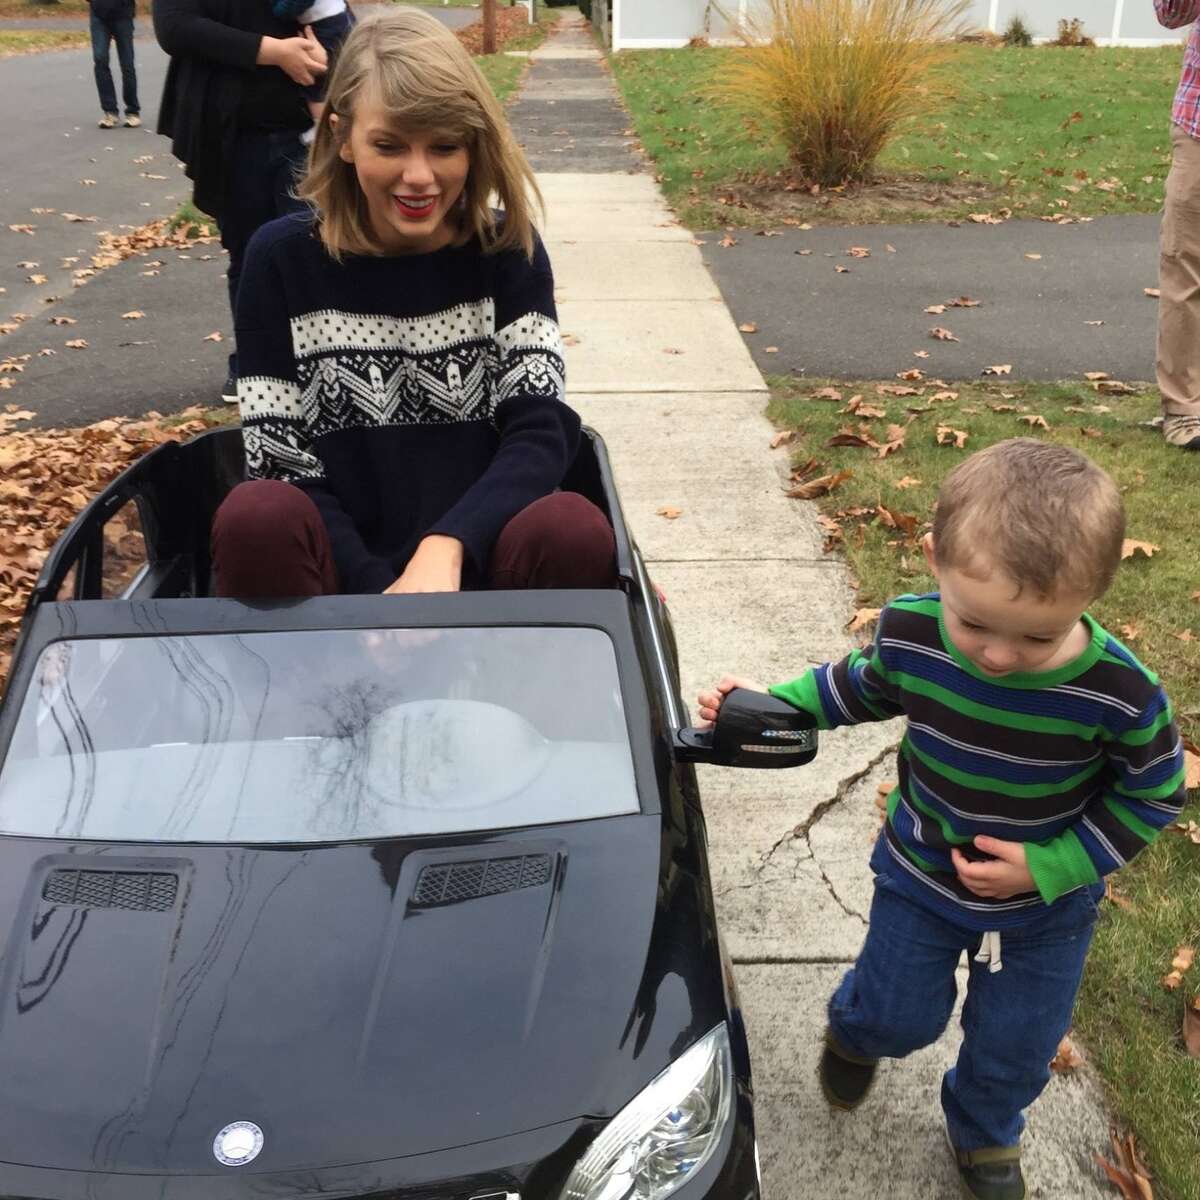 Taylor Swift (left) riding the electric toy vehicle she gifted Leyton Barnett (right) in North Haven back in 2014.